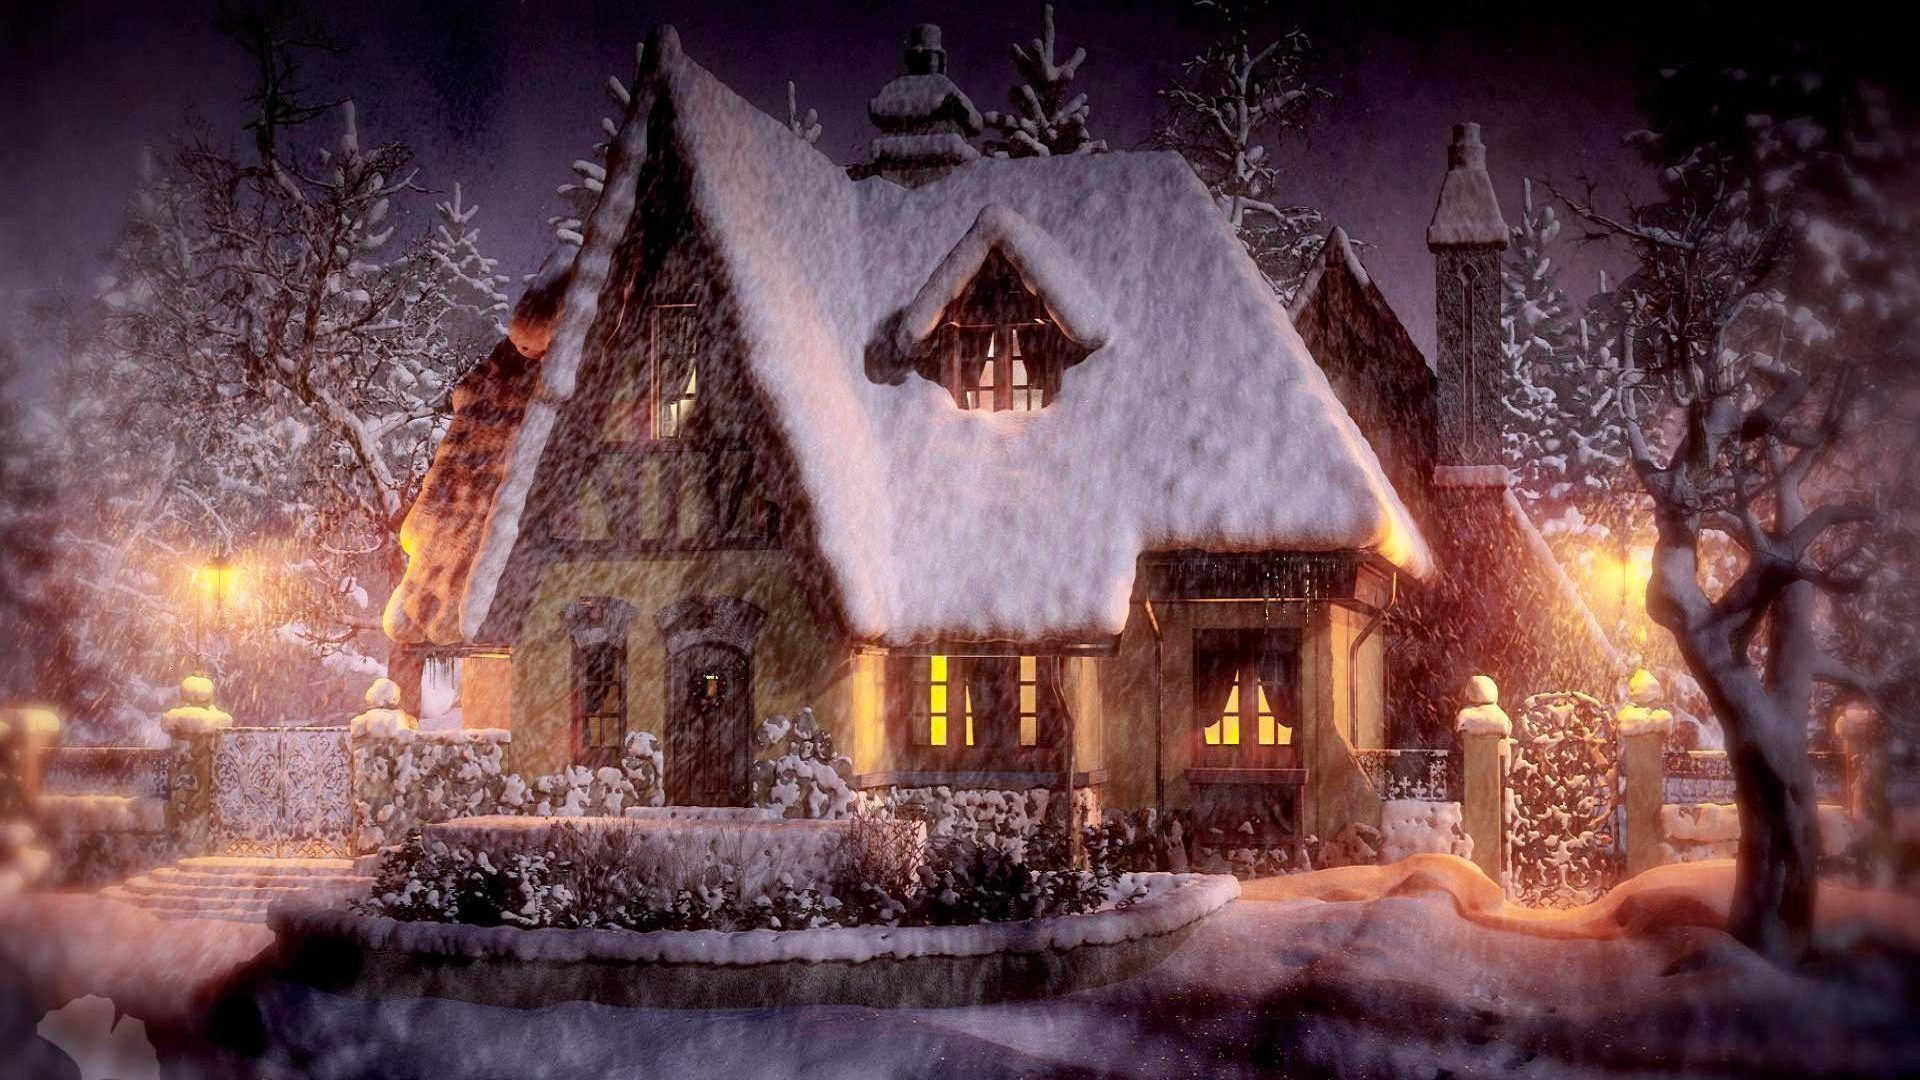 Cozy Winter Cottage Wallpapers - Wallpaper Cave